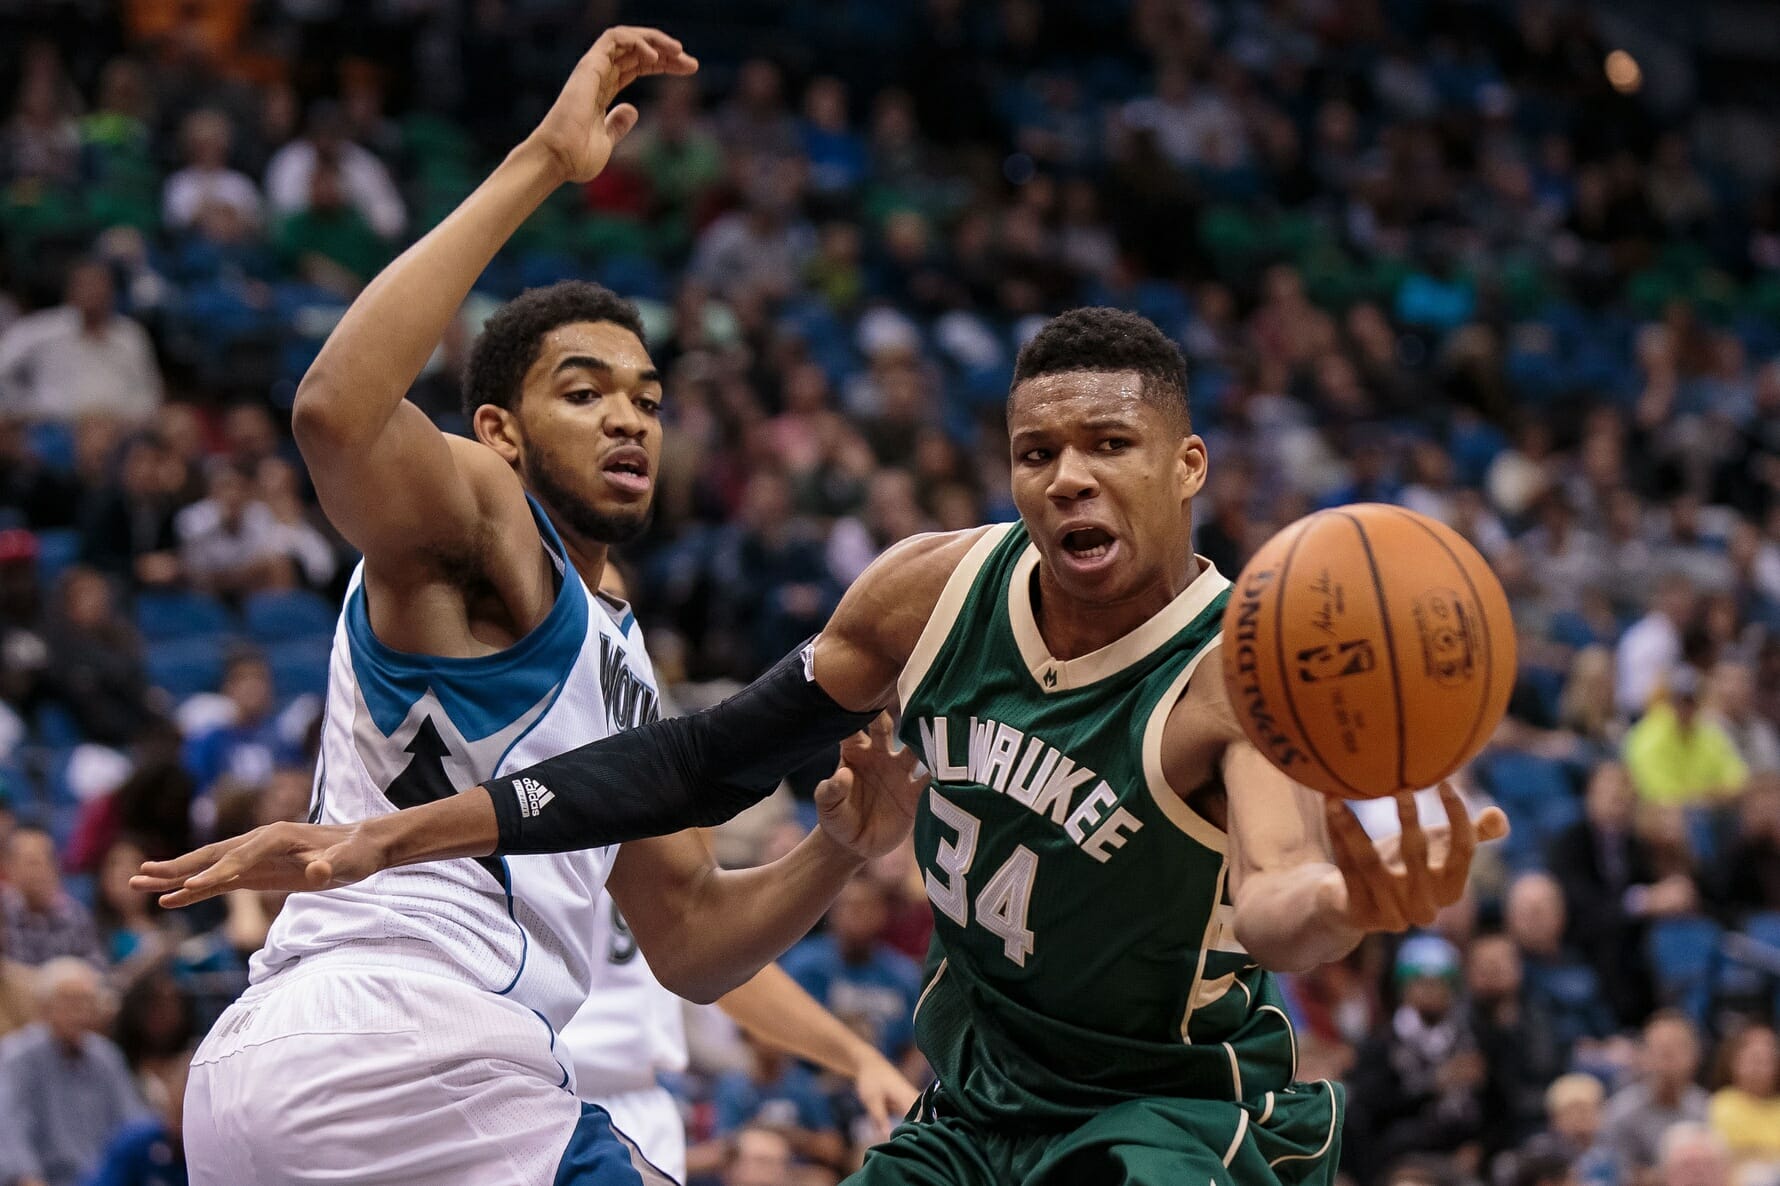 Oct 23, 2015; Minneapolis, MN, USA; Milwaukee Bucks forward Giannis Antetokounmpo (34) loses control of the ball in front of Minnesota Timberwolves center Karl-Anthony Towns (32) in the second quarter at Target Center. Mandatory Credit: Brad Rempel-USA TODAY Sports (NBA Rumors)